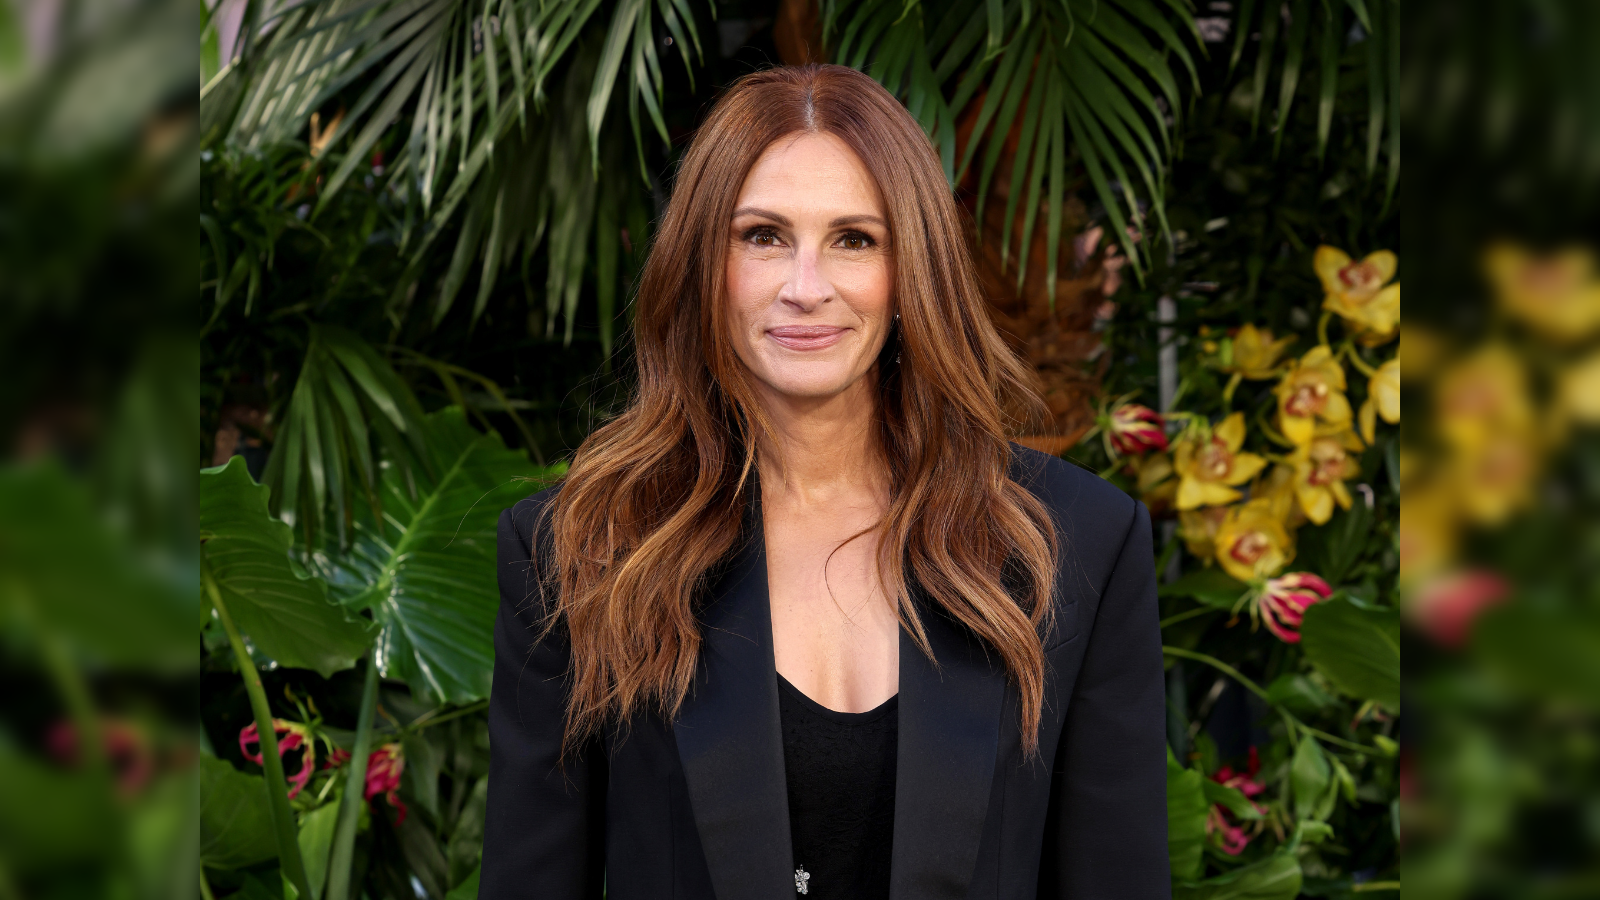 https://img.etimg.com/thumb/width-1600,height-900,imgsize-1851539,resizemode-75,msid-105628405/magazines/panache/julia-roberts-talks-about-her-new-movie-leave-the-world-behind-says-she-plays-someone-very-different-from-herself-in-upcoming-disaster-thriller.jpg